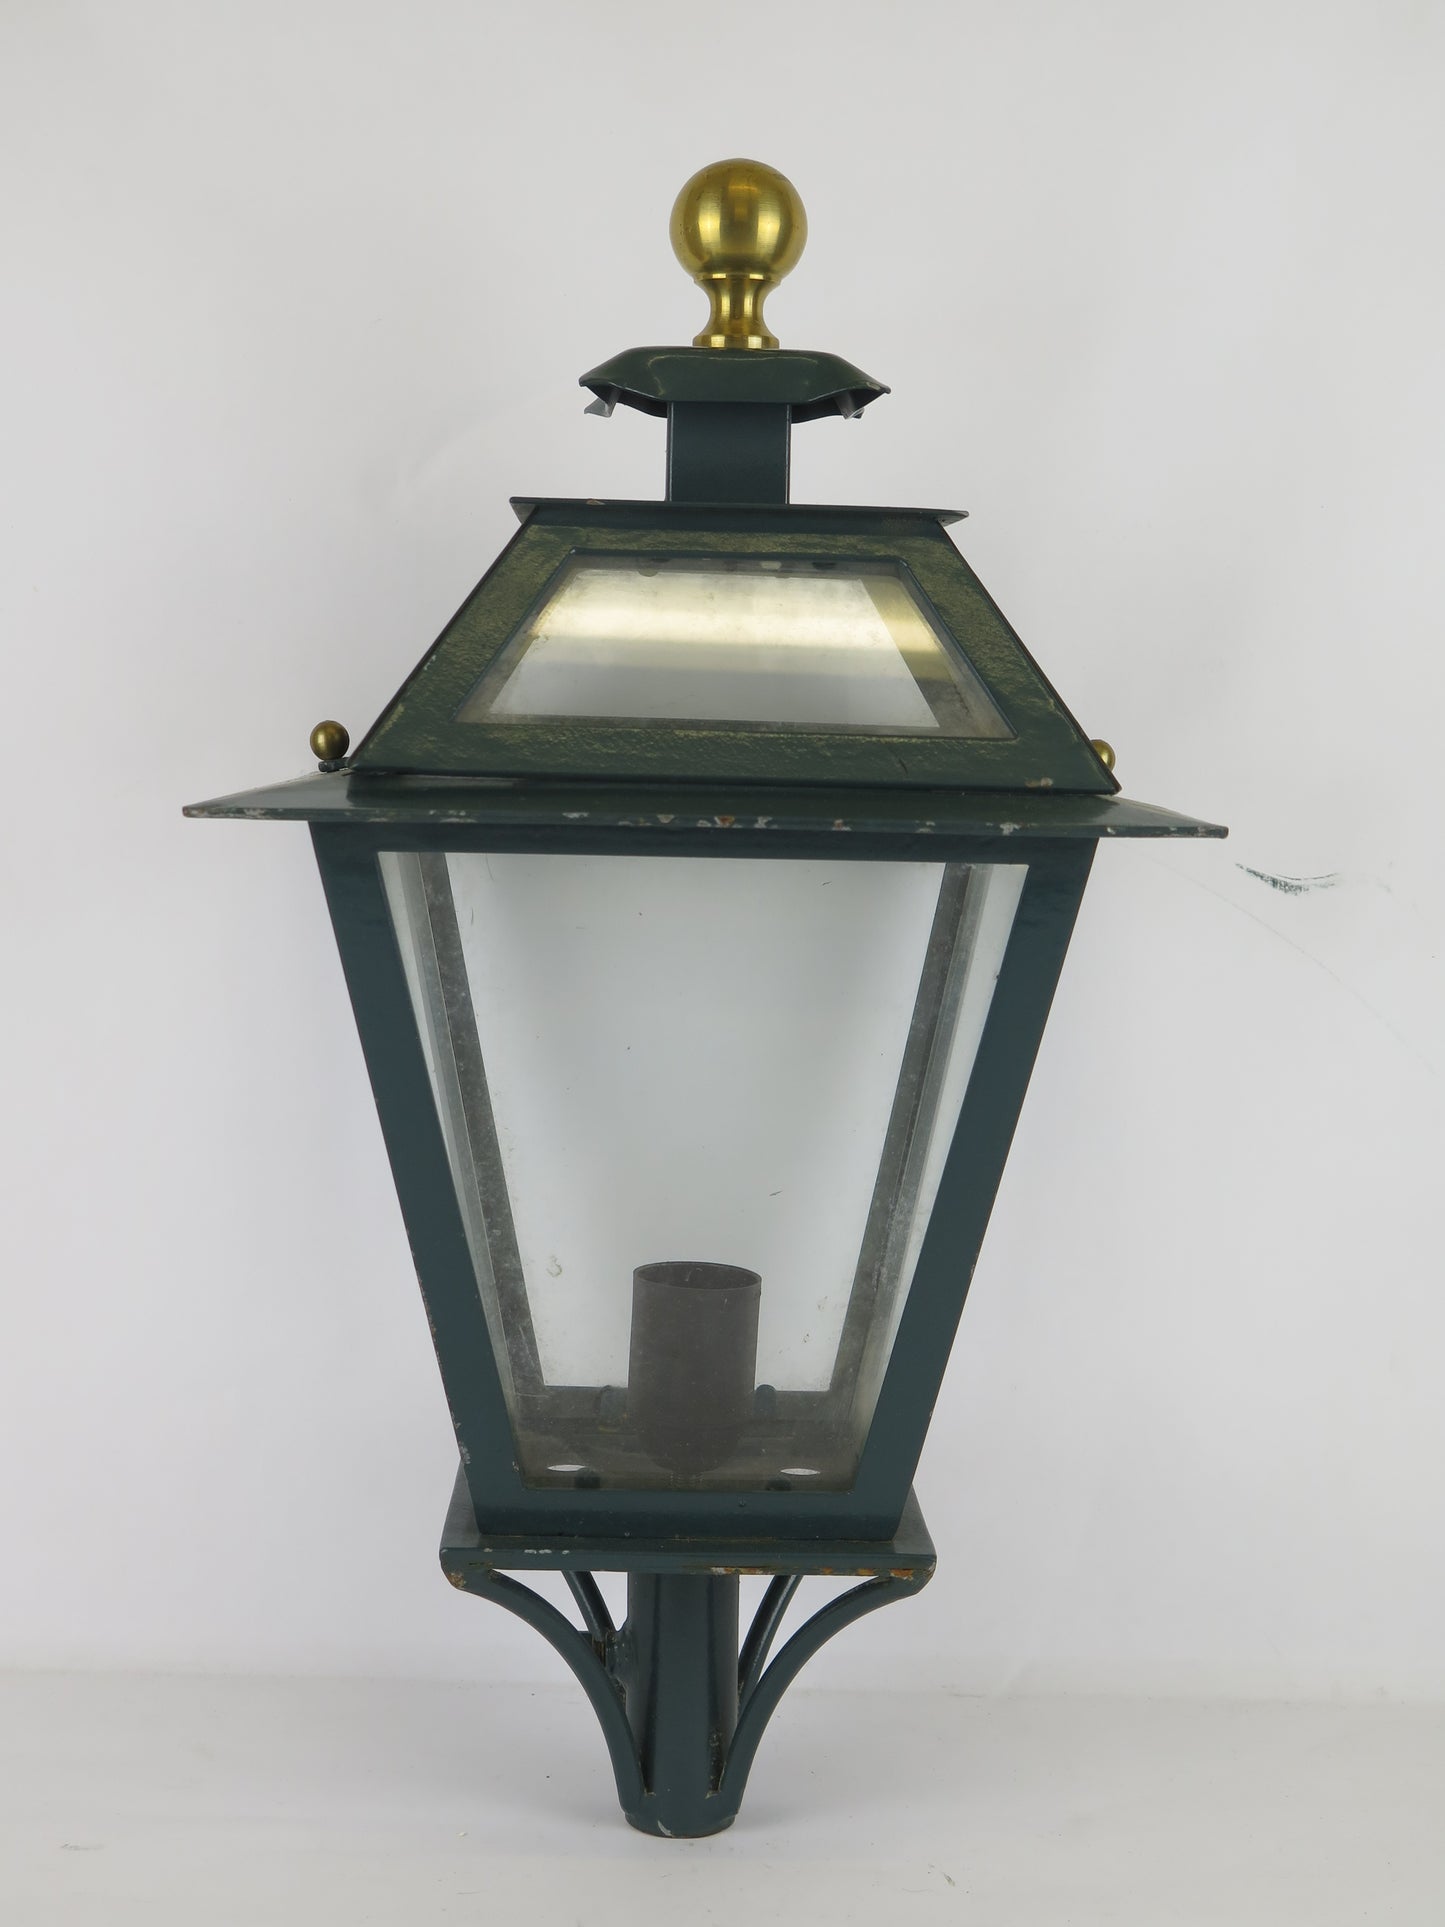 Wrought iron lamppost with vintage wall bracket high quality Italian Chandelier Lantern CH S1